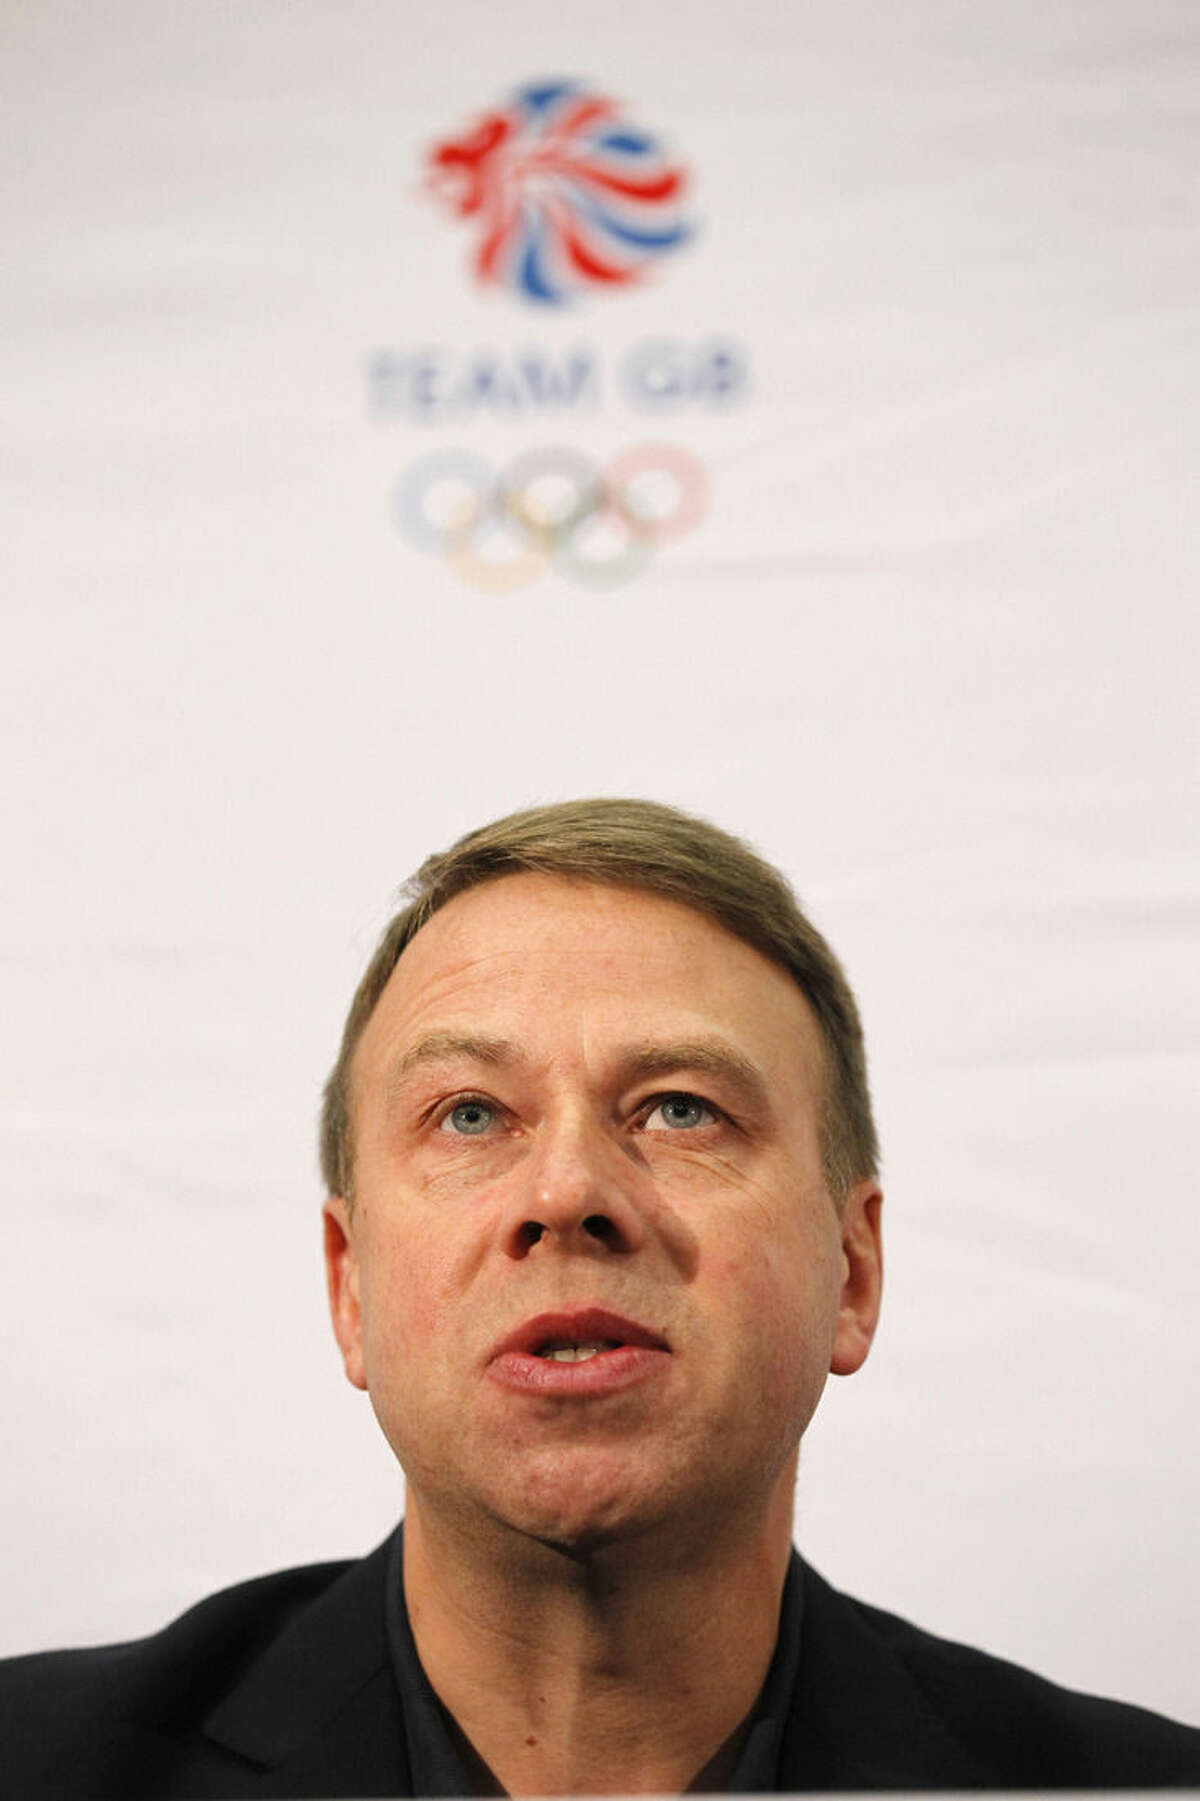 FILE - In this Oct. 20, 2011 file photo, Andy Hunt talks to the media during a press conference at Wembley Stadium in London. Hunt replaced Peter Sowrey in January 2016 as the new CEO of World Sailing. Sowrey says he was fired for pushing to get rid of polluted Guanabara Bay as the sailing venue for this year's Rio de Janeiro Olympics. (AP Photo/Sang Tan, File)